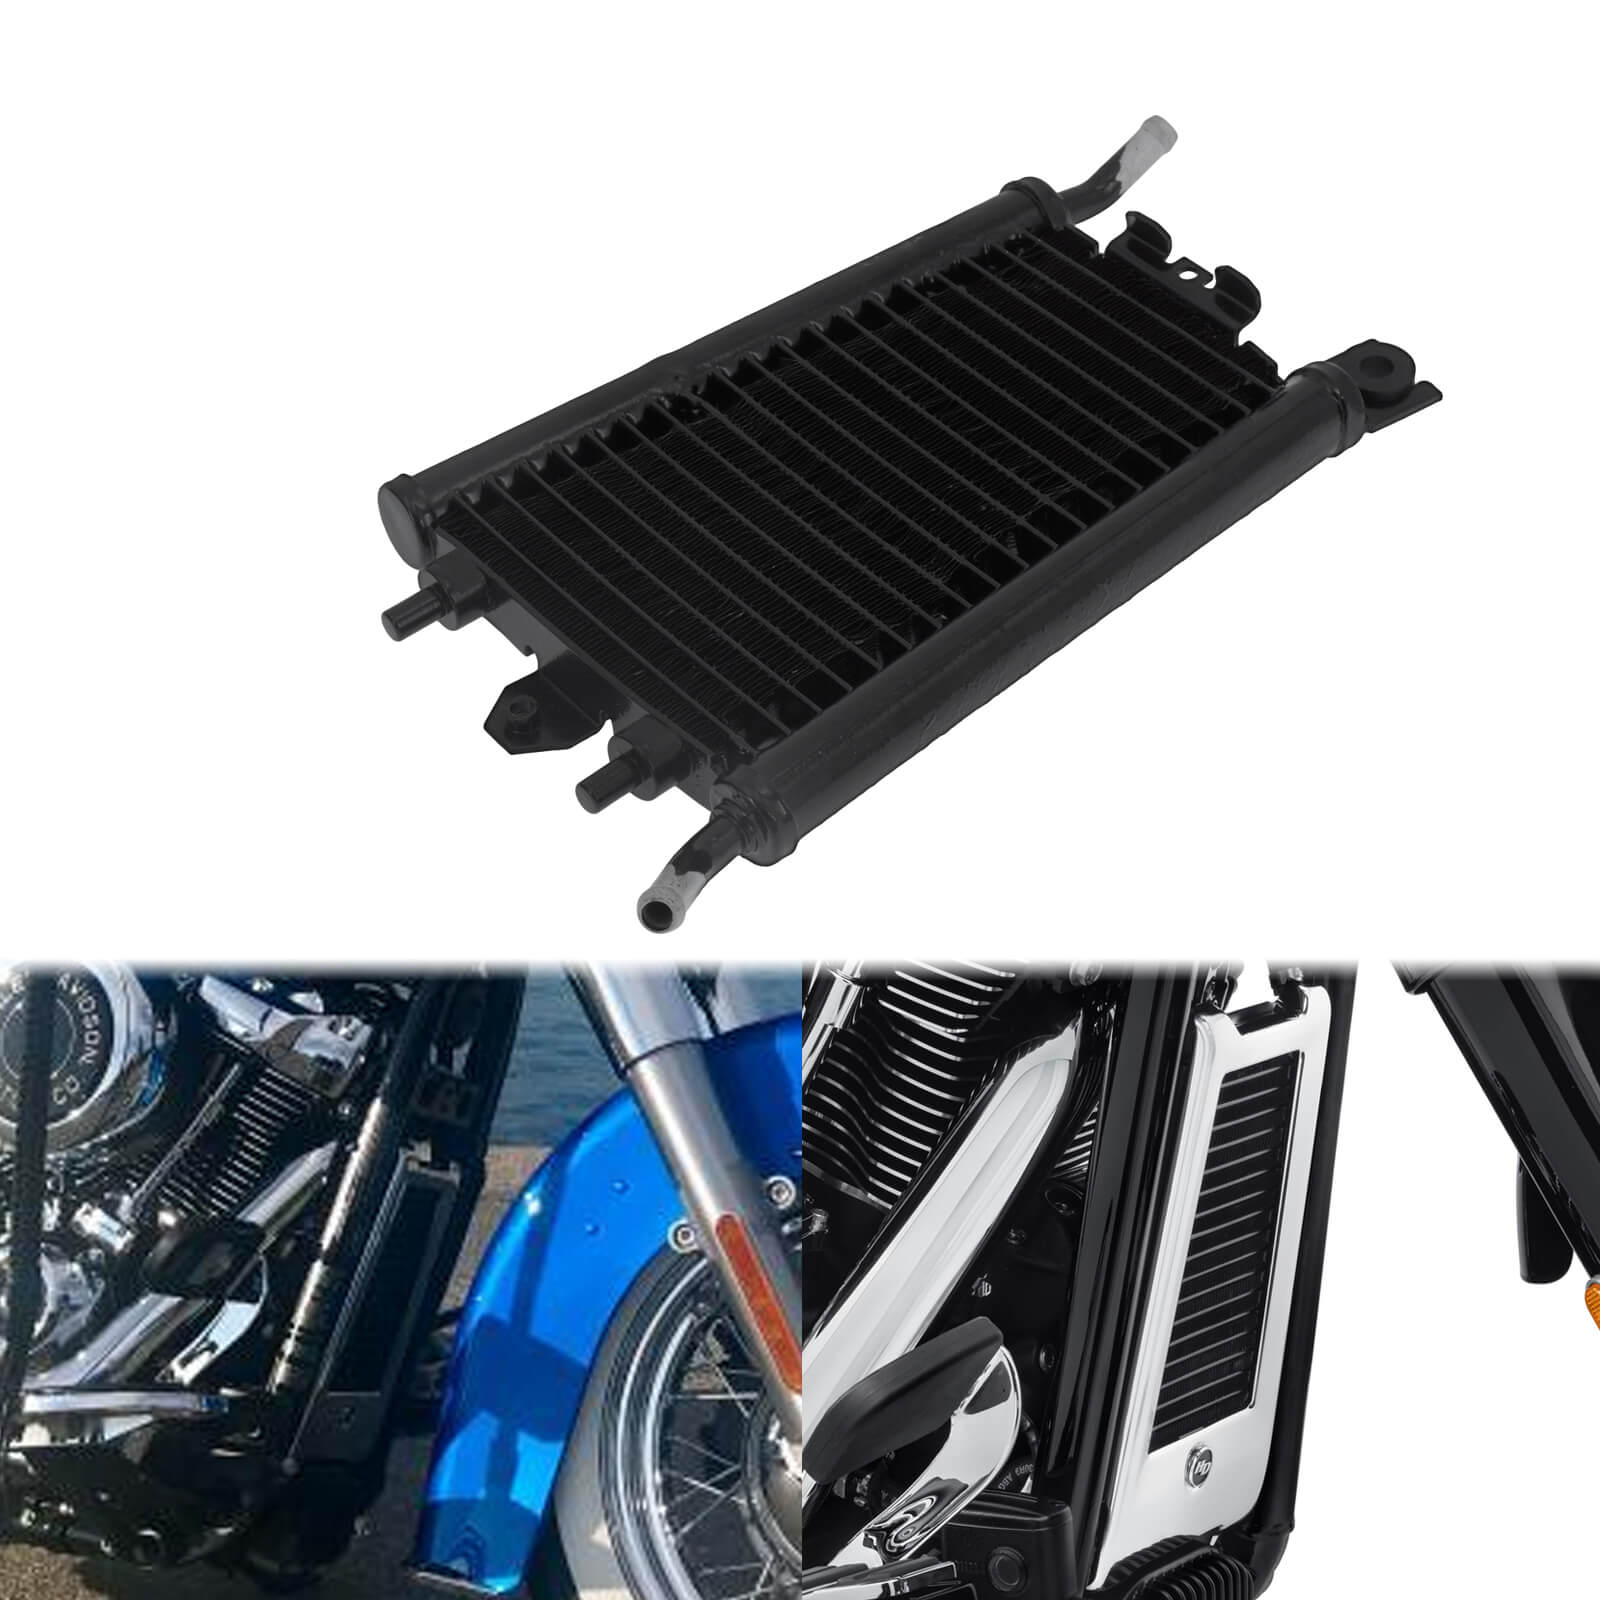 TH025701-mactions-oil-cooler-radiator-for-harley-softail-streetbob